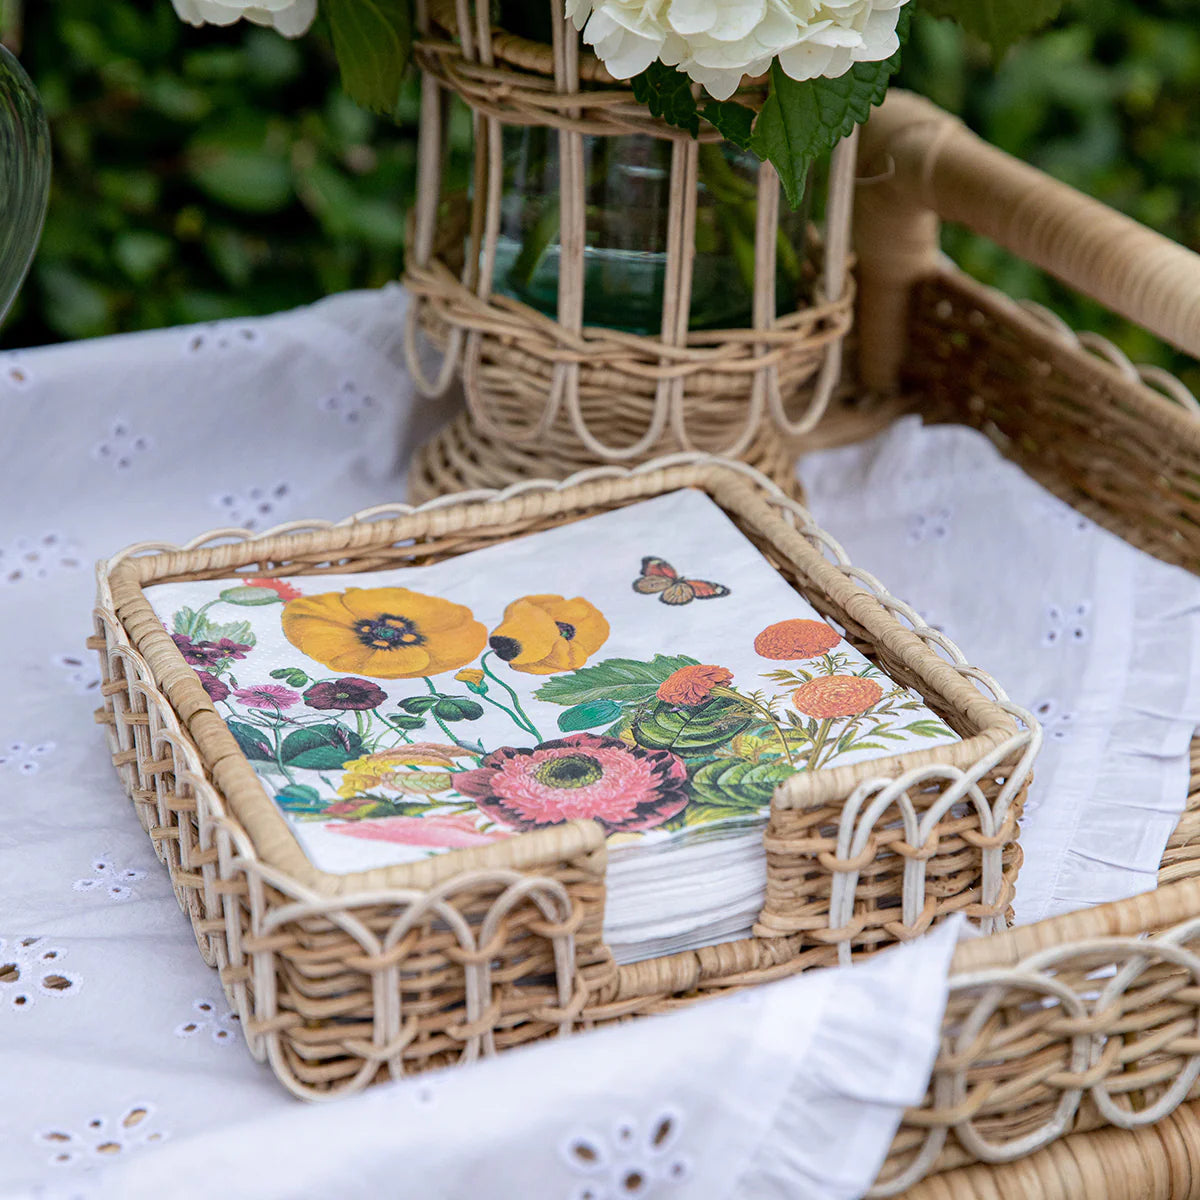 Field of Flowers Paper Napkins